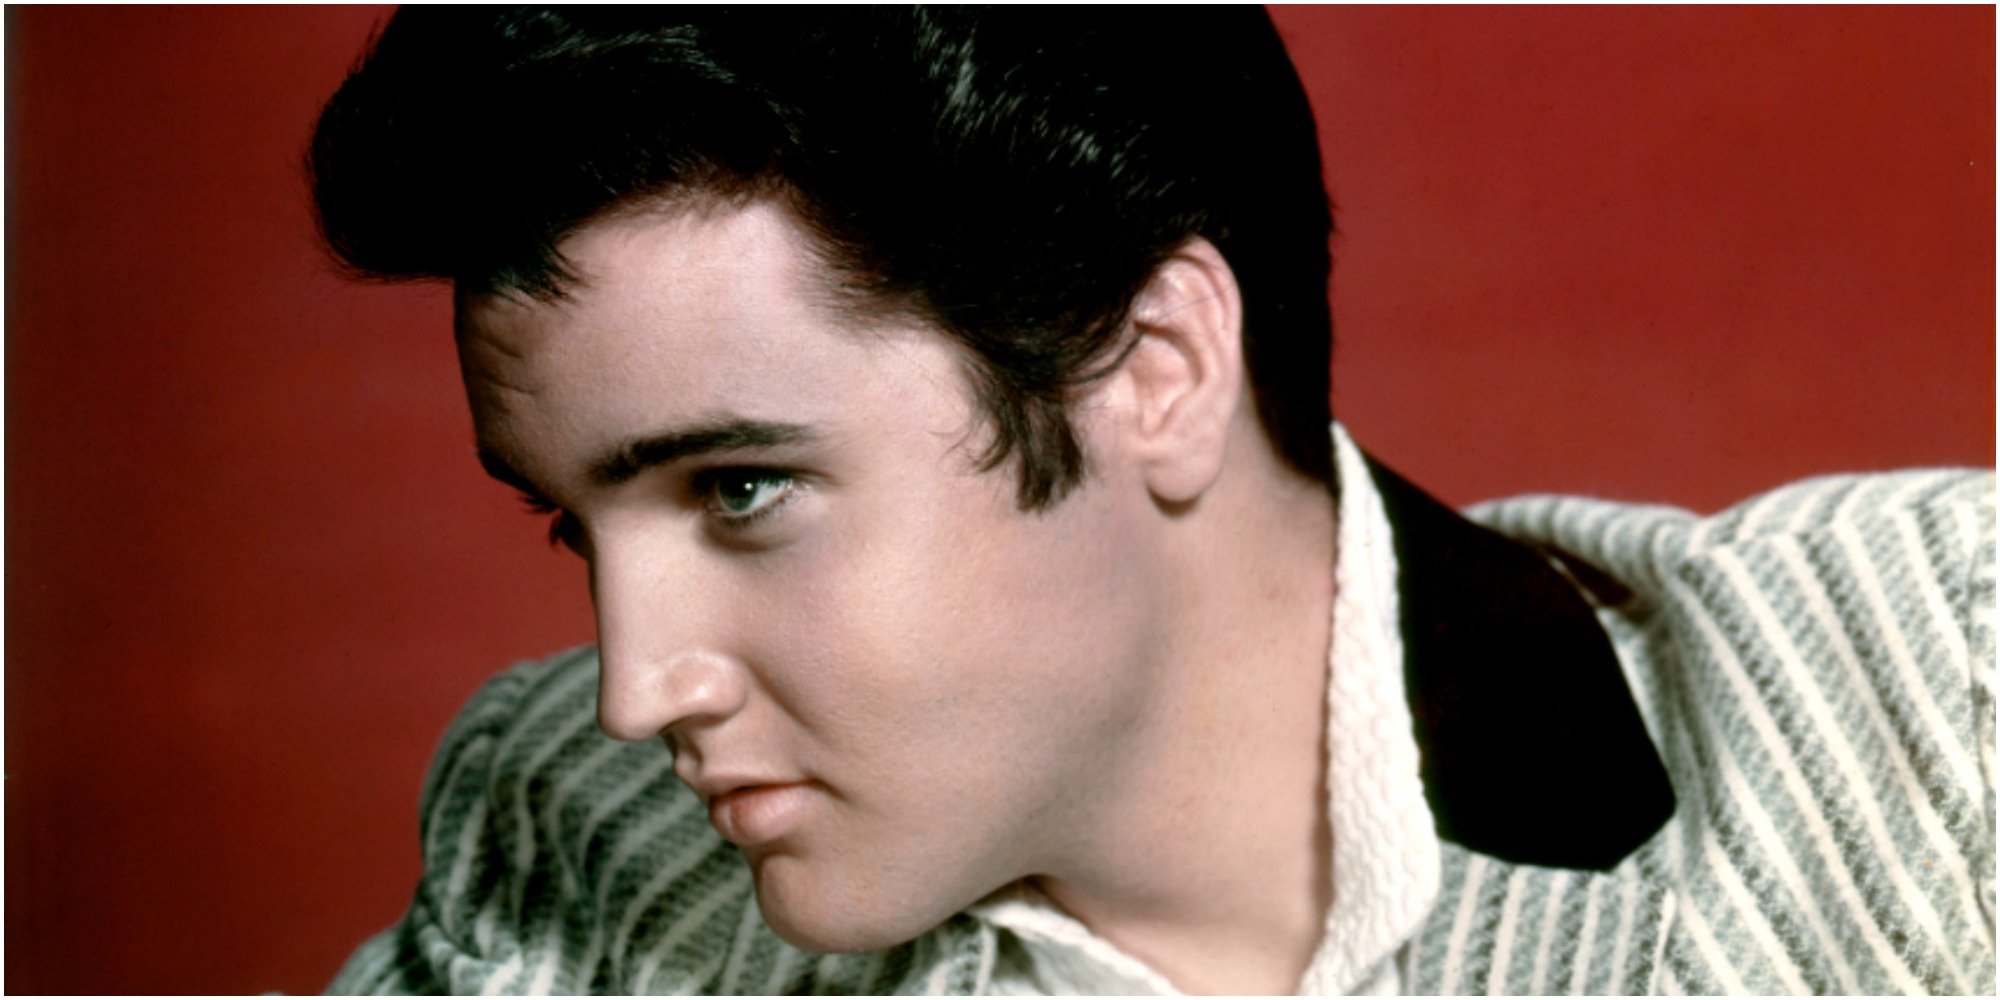 Elvis Presley seen in a promotional photograph.